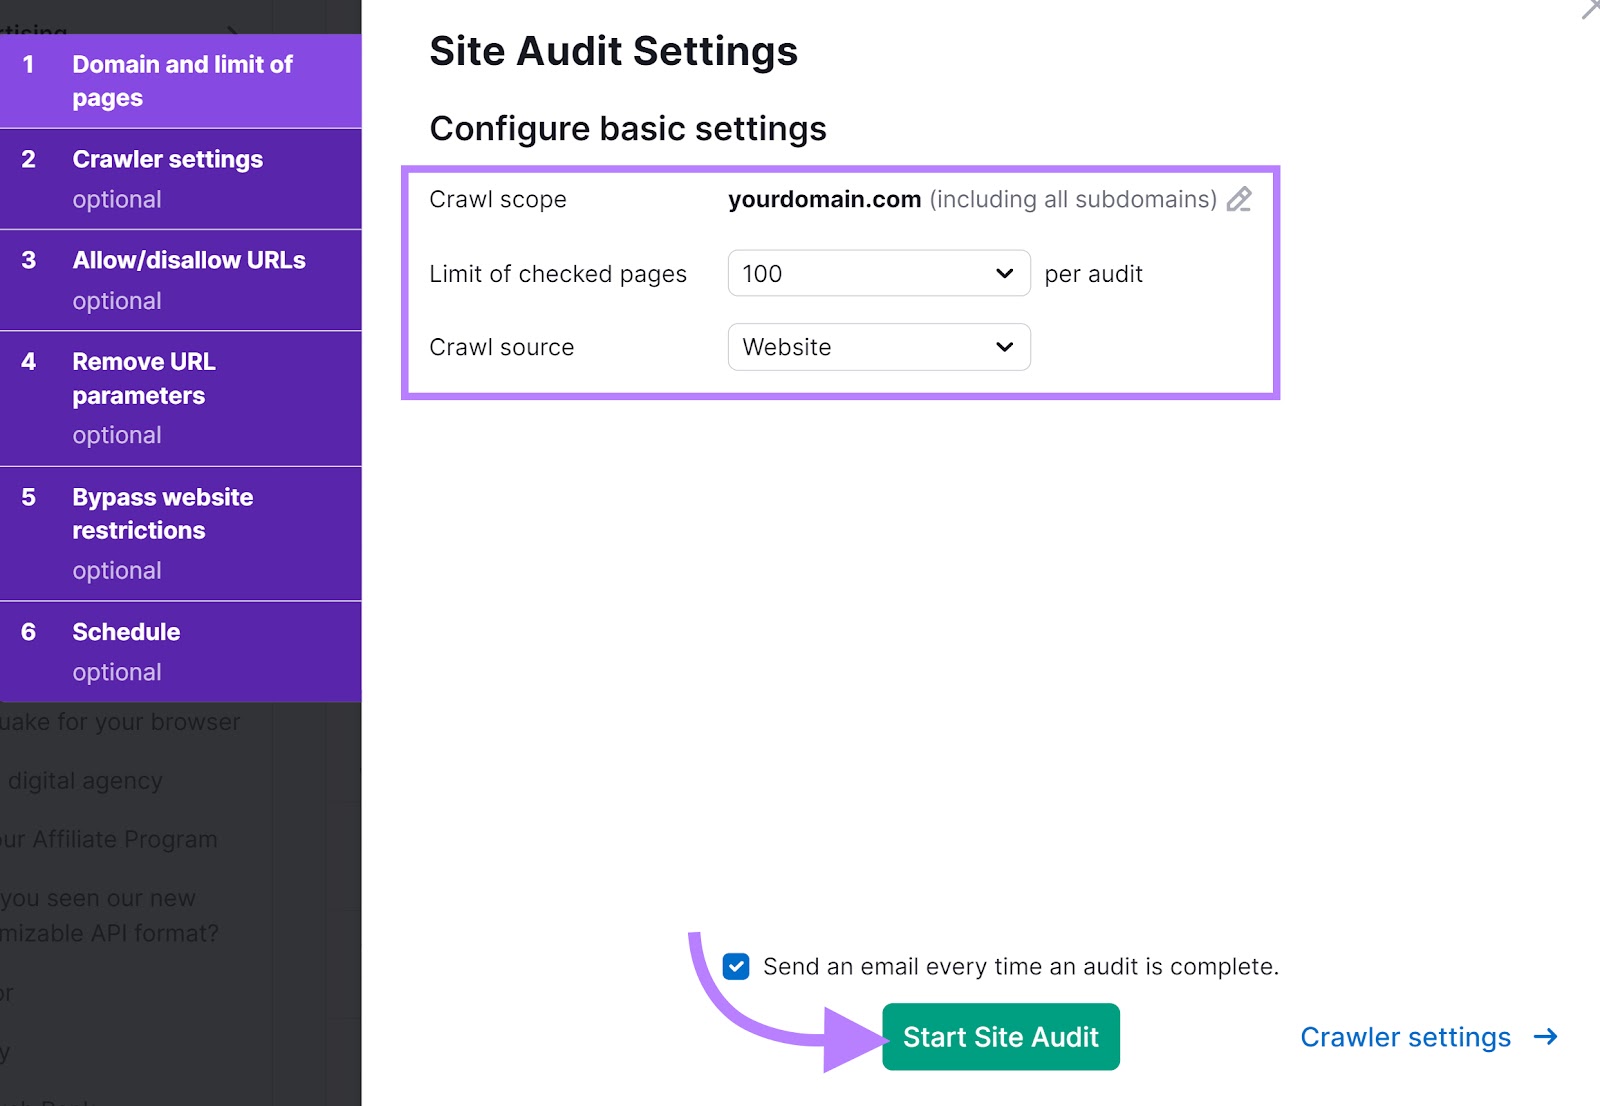 Site Audit Settings window with the basic settings highlighted and an arrow pointing to the "Start Site Audit" button.